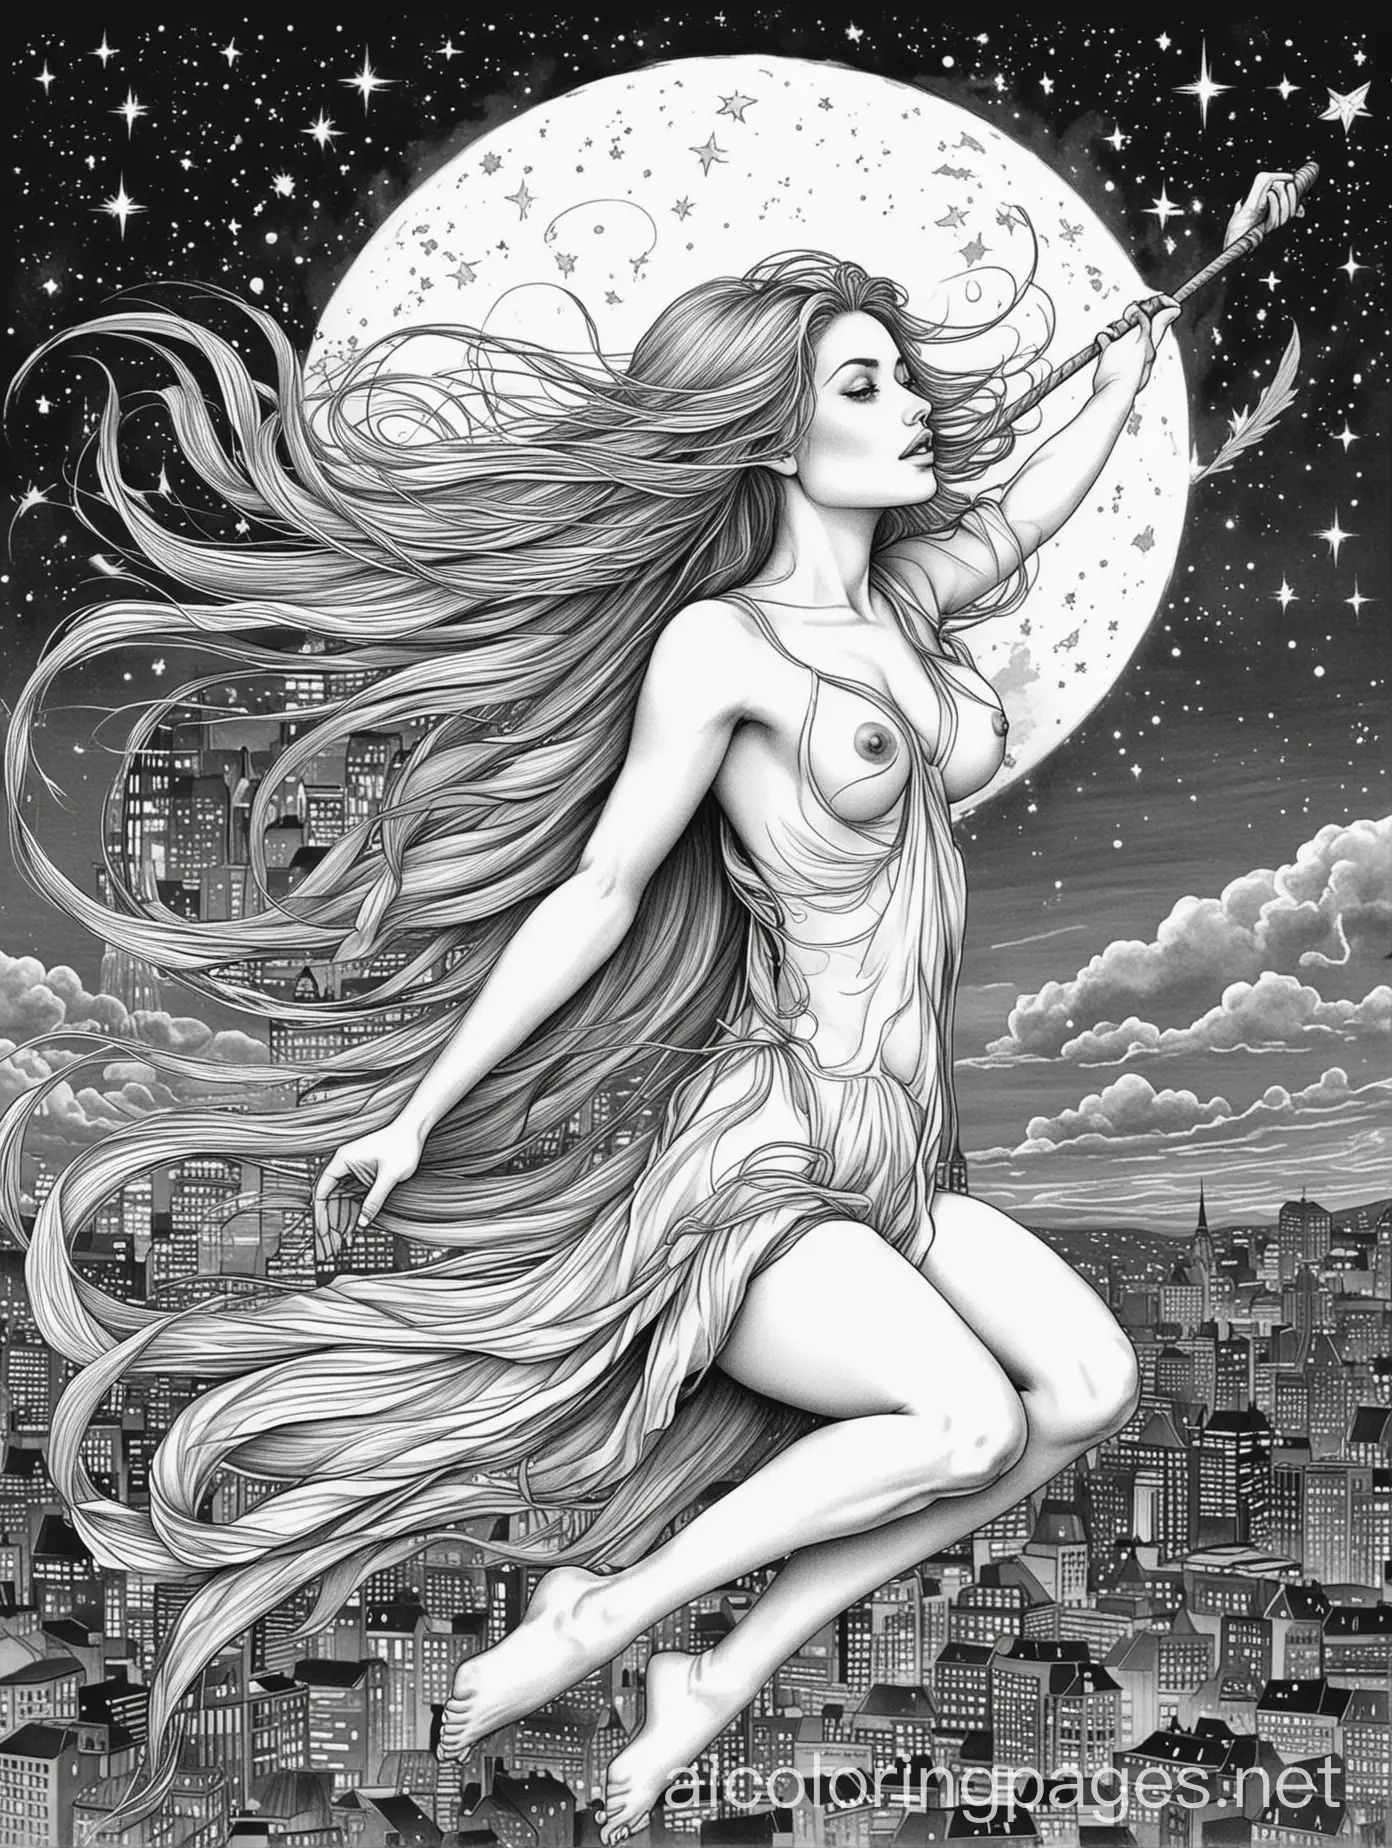 Nude woman with long hair is flying in the night sky sitting on a broomstick, leaning her body forward, she has a look of delight on her face, her hair is fluttering in the wind, she is flying against a background of city buildings, coloring page, black and white, line drawing, white background, simplicity, lots of white space. The background of the coloring page is simply white to make it easy for children to color within the lines., Coloring Page, black and white, line art, white background, Simplicity, Ample White Space. The background of the coloring page is plain white to make it easy for young children to color within the lines. The outlines of all the subjects are easy to distinguish, making it simple for kids to color without too much difficulty